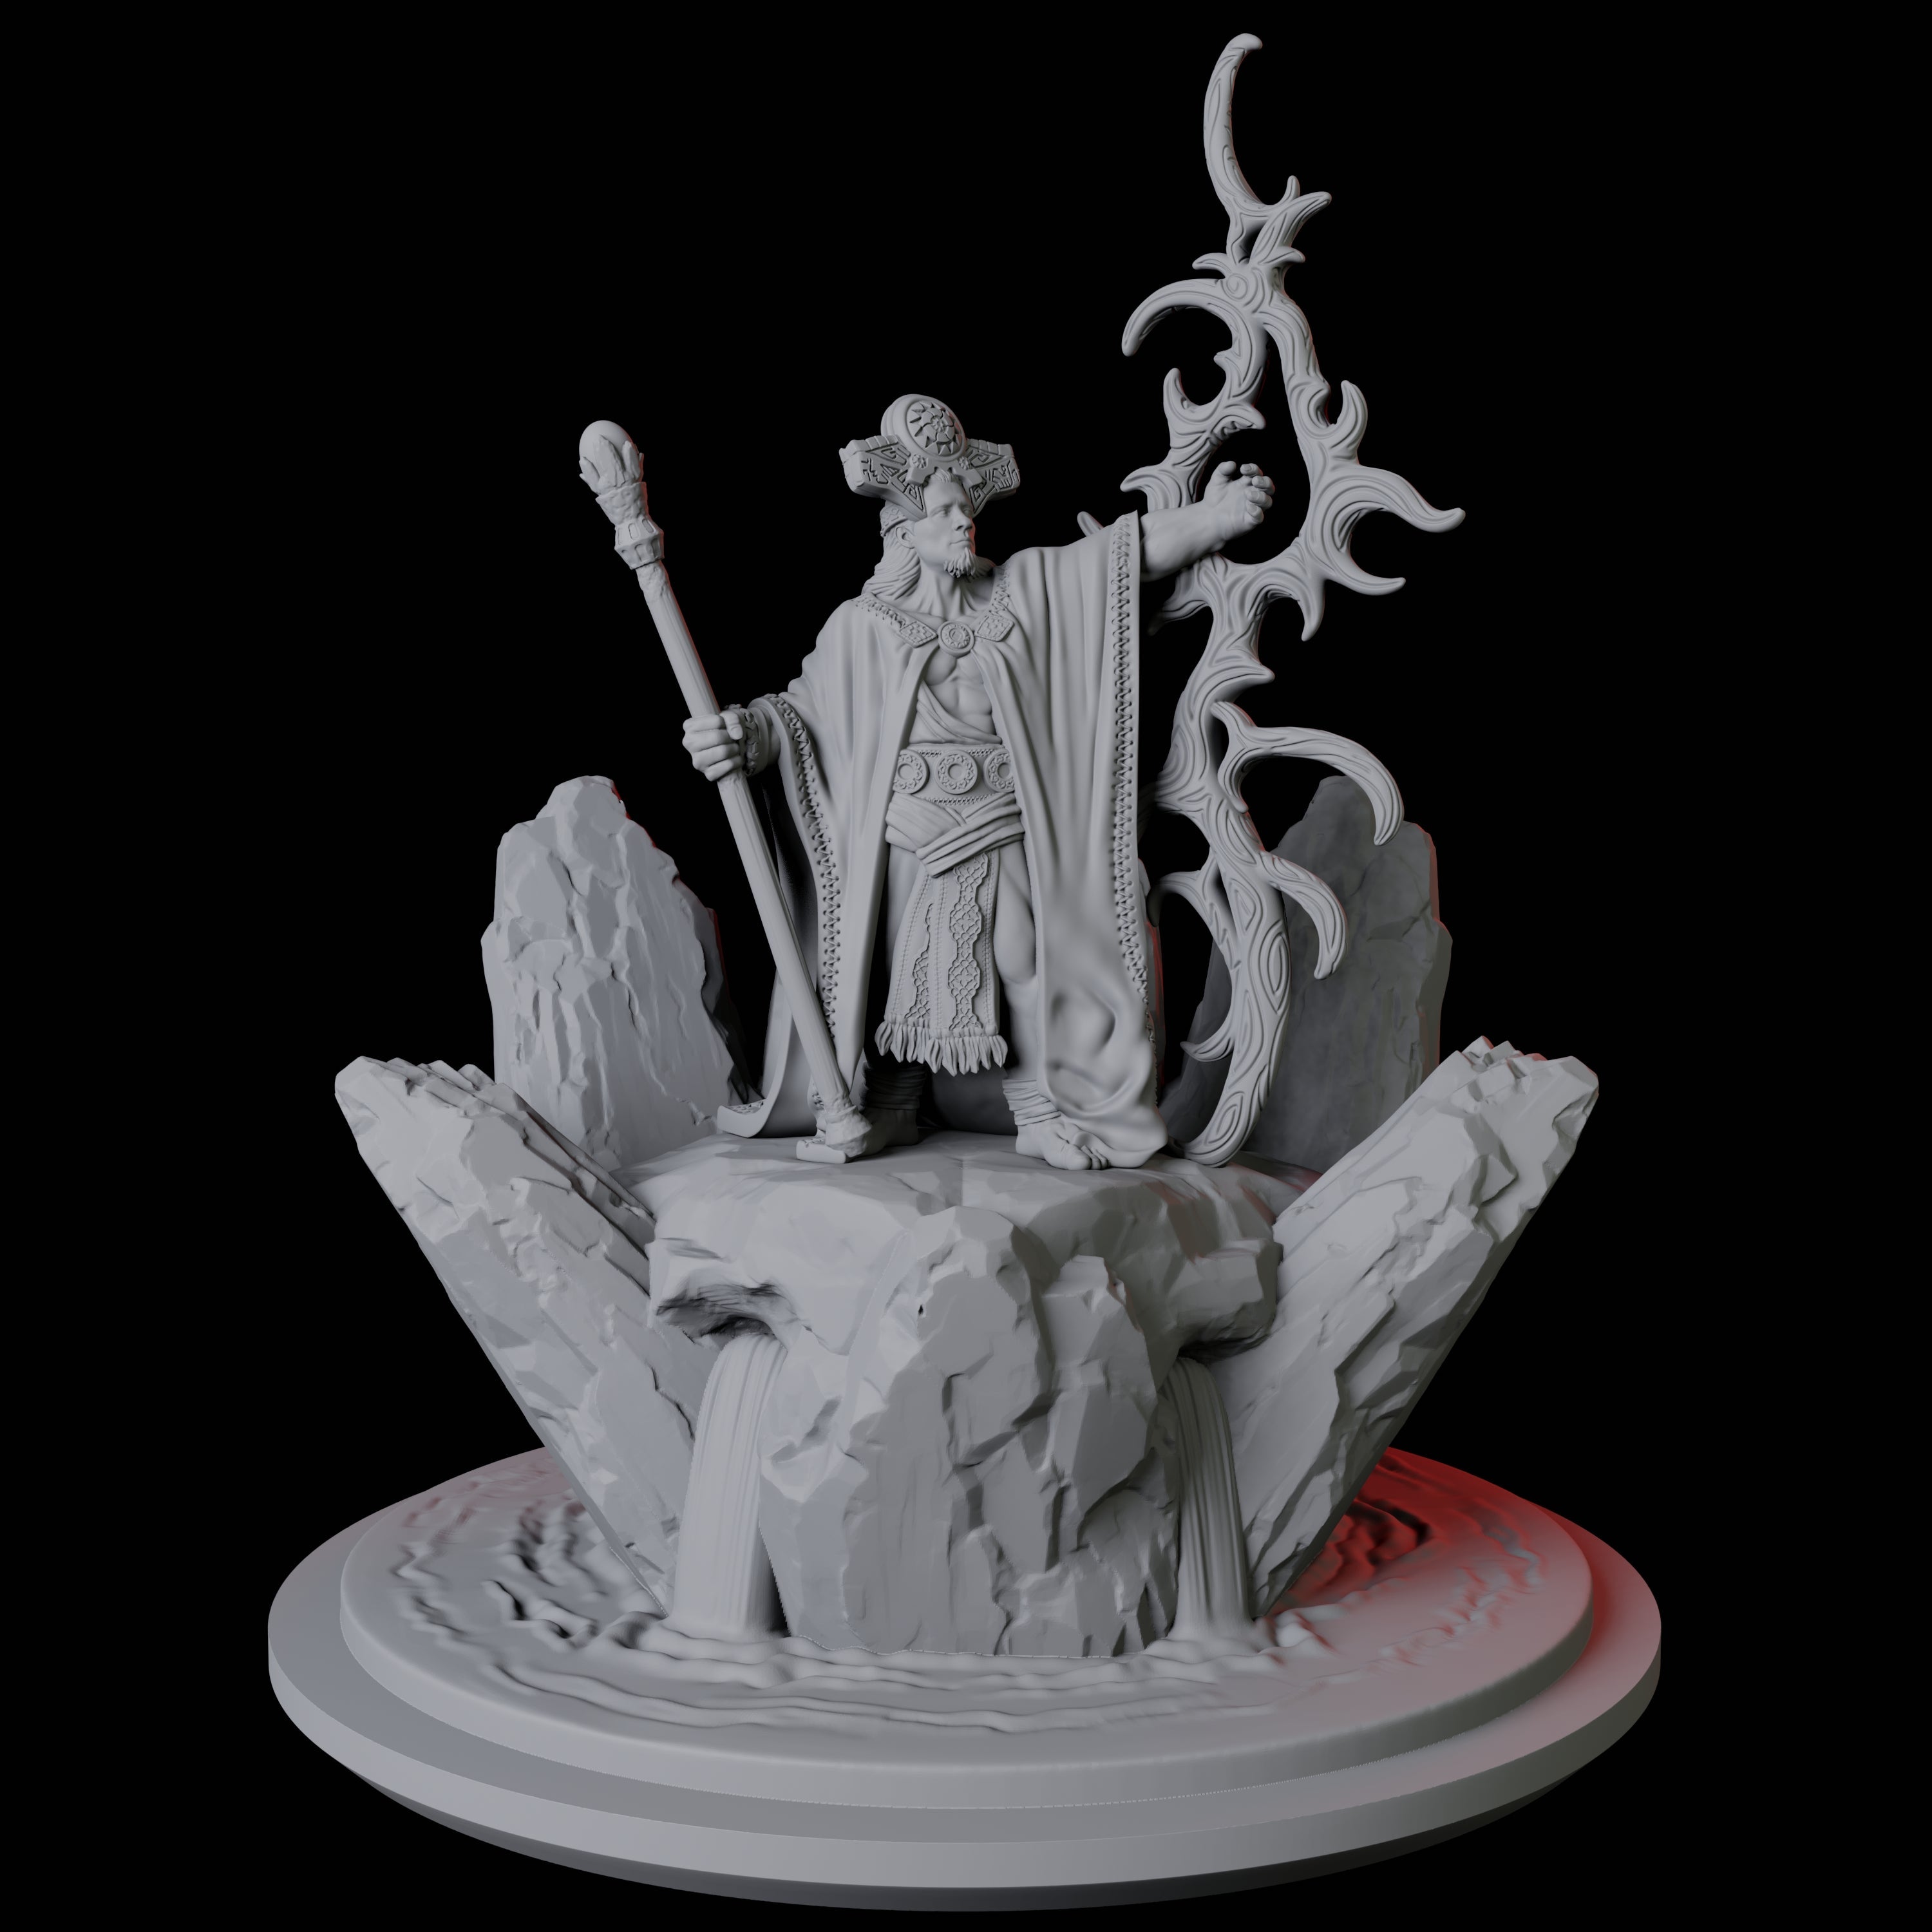 Elder Wizard Miniature for Dungeons and Dragons, Pathfinder or other TTRPGs